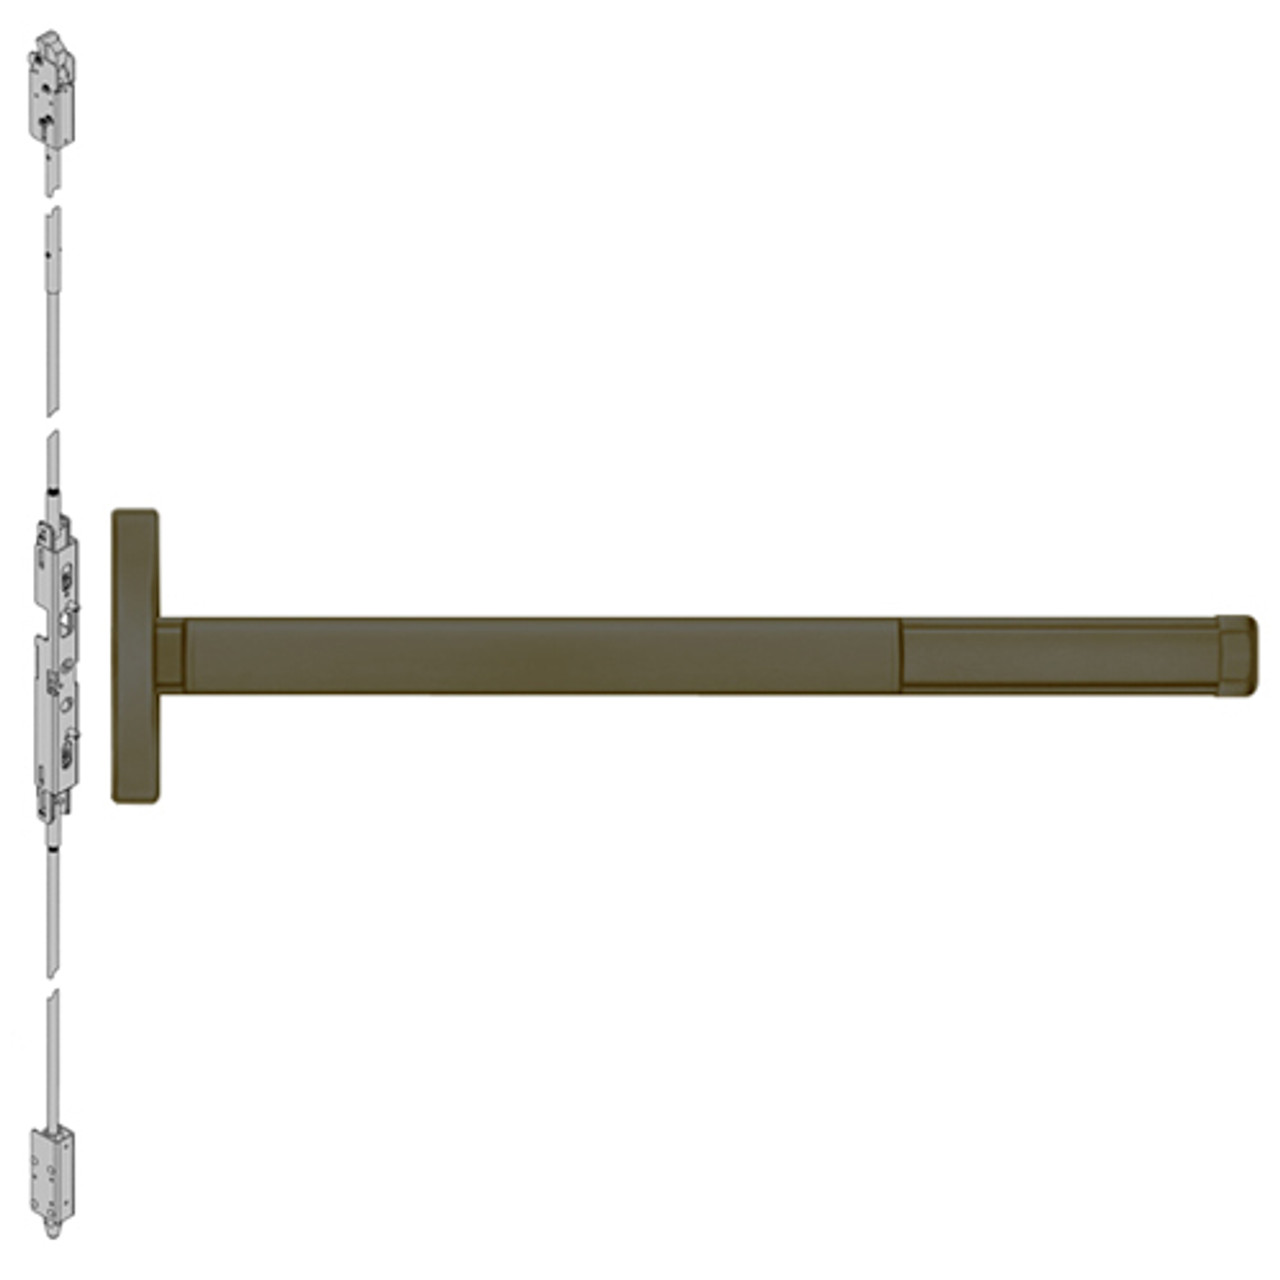 TSFL2603-613-48 PHI 2600 Series Fire Rated Concealed Vertical Rod Exit Device with Touchbar Monitoring Switch Prepped for Key Retracts Latchbolt in Oil Rubbed Bronze Finish